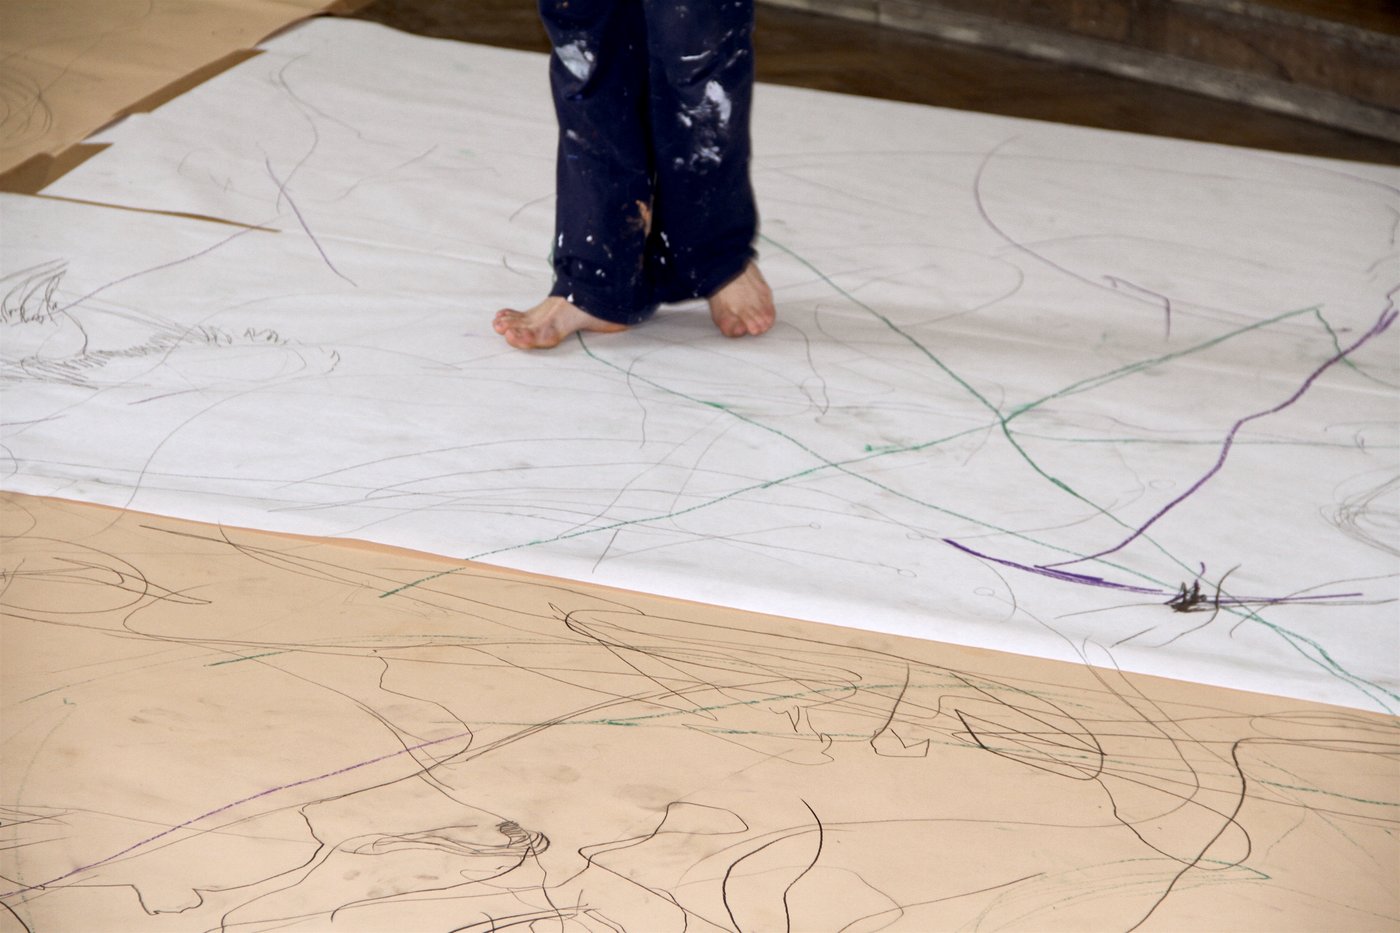 Marked sheets of paper lying on the floor and the feet of a person walking on them